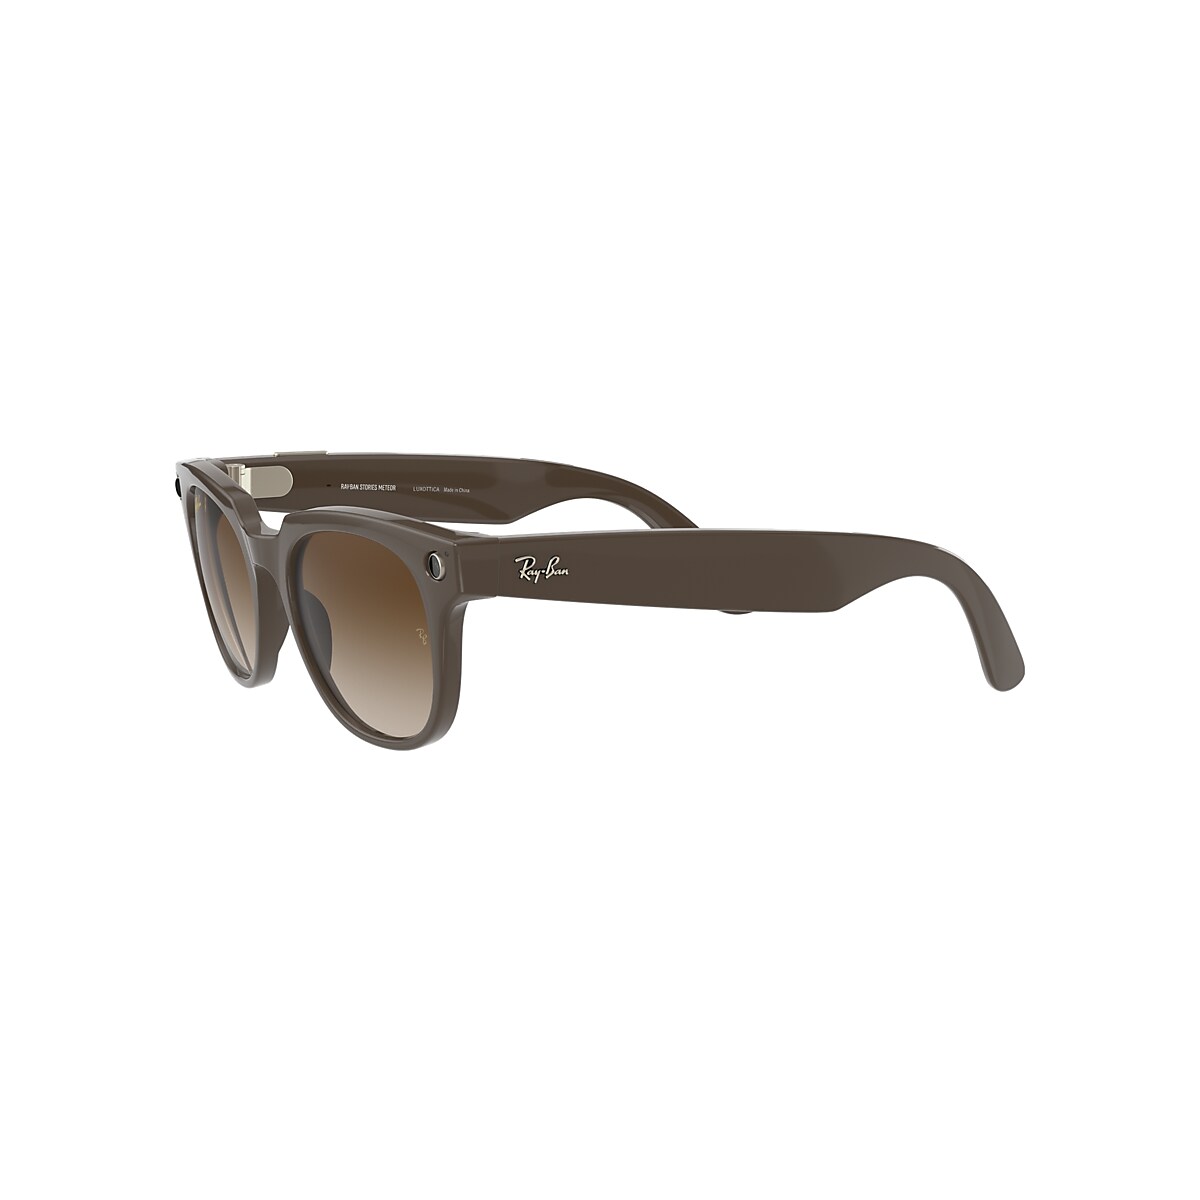 Ray-ban Stories | Meteor Sunglasses in Shiny Brown and Brown | Ray-Ban®